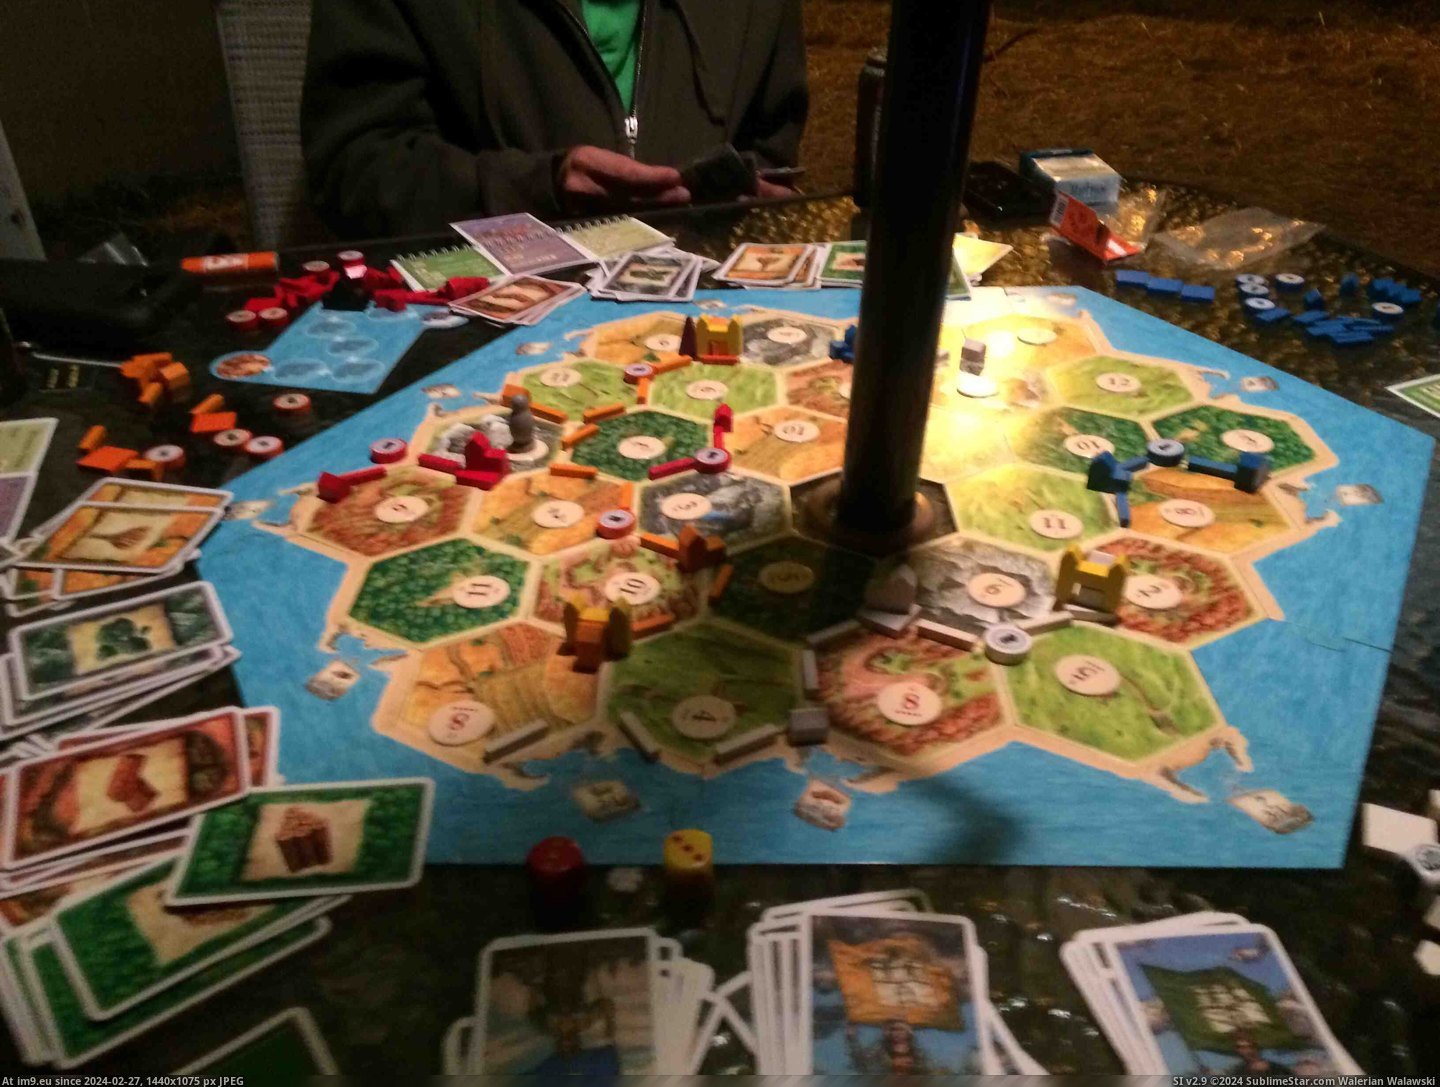 #Gaming #One #Night #Patio #Tables #Settlers #Catan #Played #Center #Umbrella [Gaming] we played settlers of catan outside last night on one of those patio tables with an umbrella in the center Pic. (Obraz z album My r/GAMING favs))